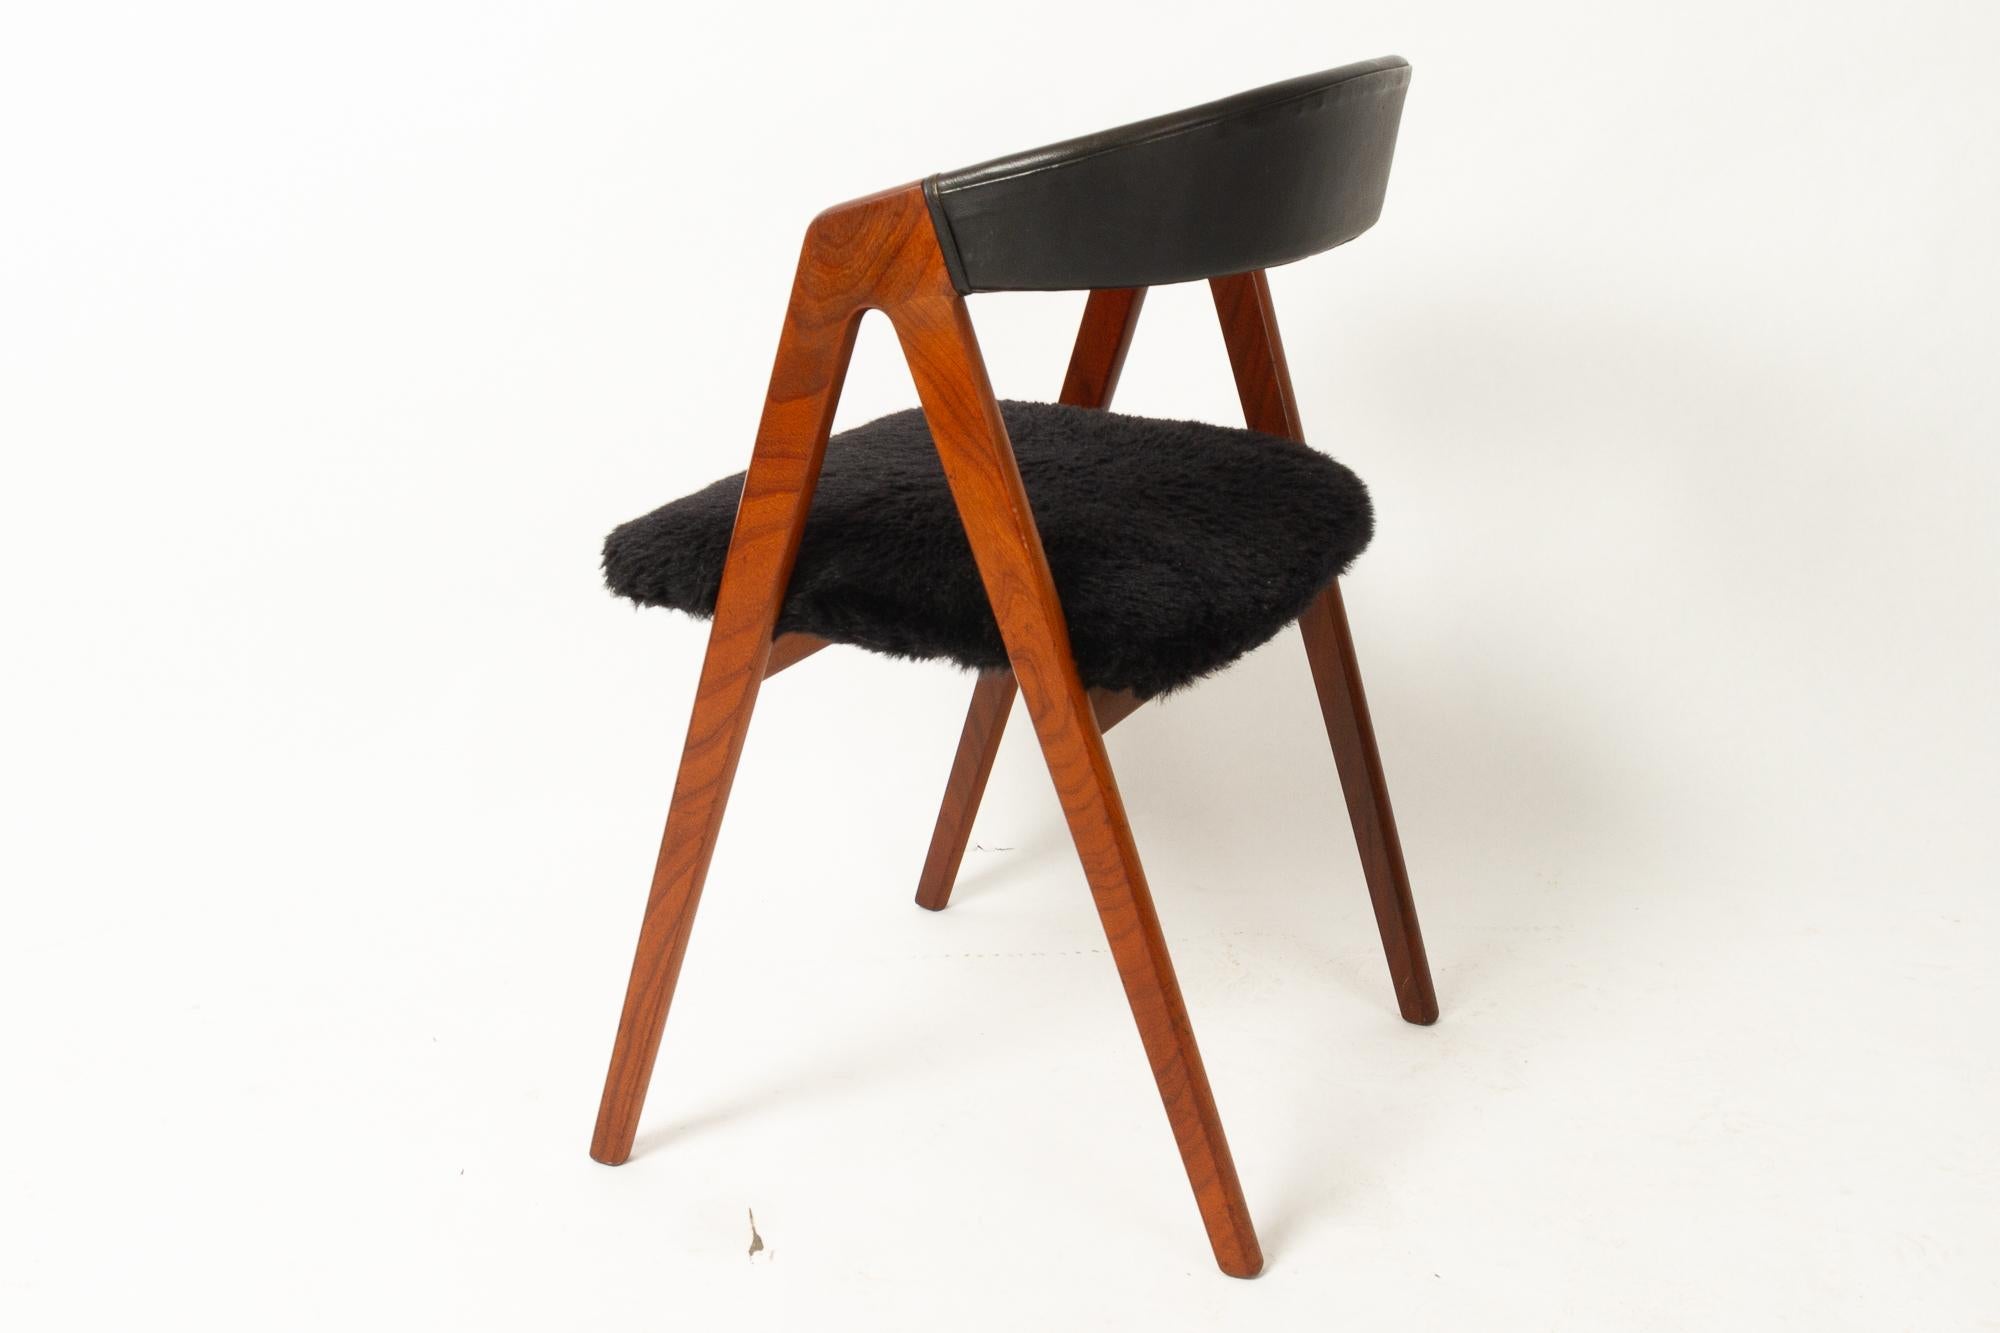 Danish vintage teak chair, 1960s.
Mid-Century Modern chair in solid teak with curved backrest. Very beautiful dark teak grain. Backrest clad in leatherette. Seat upholstered in black faux sheepskin for extra comfort. Very comfortable chair with